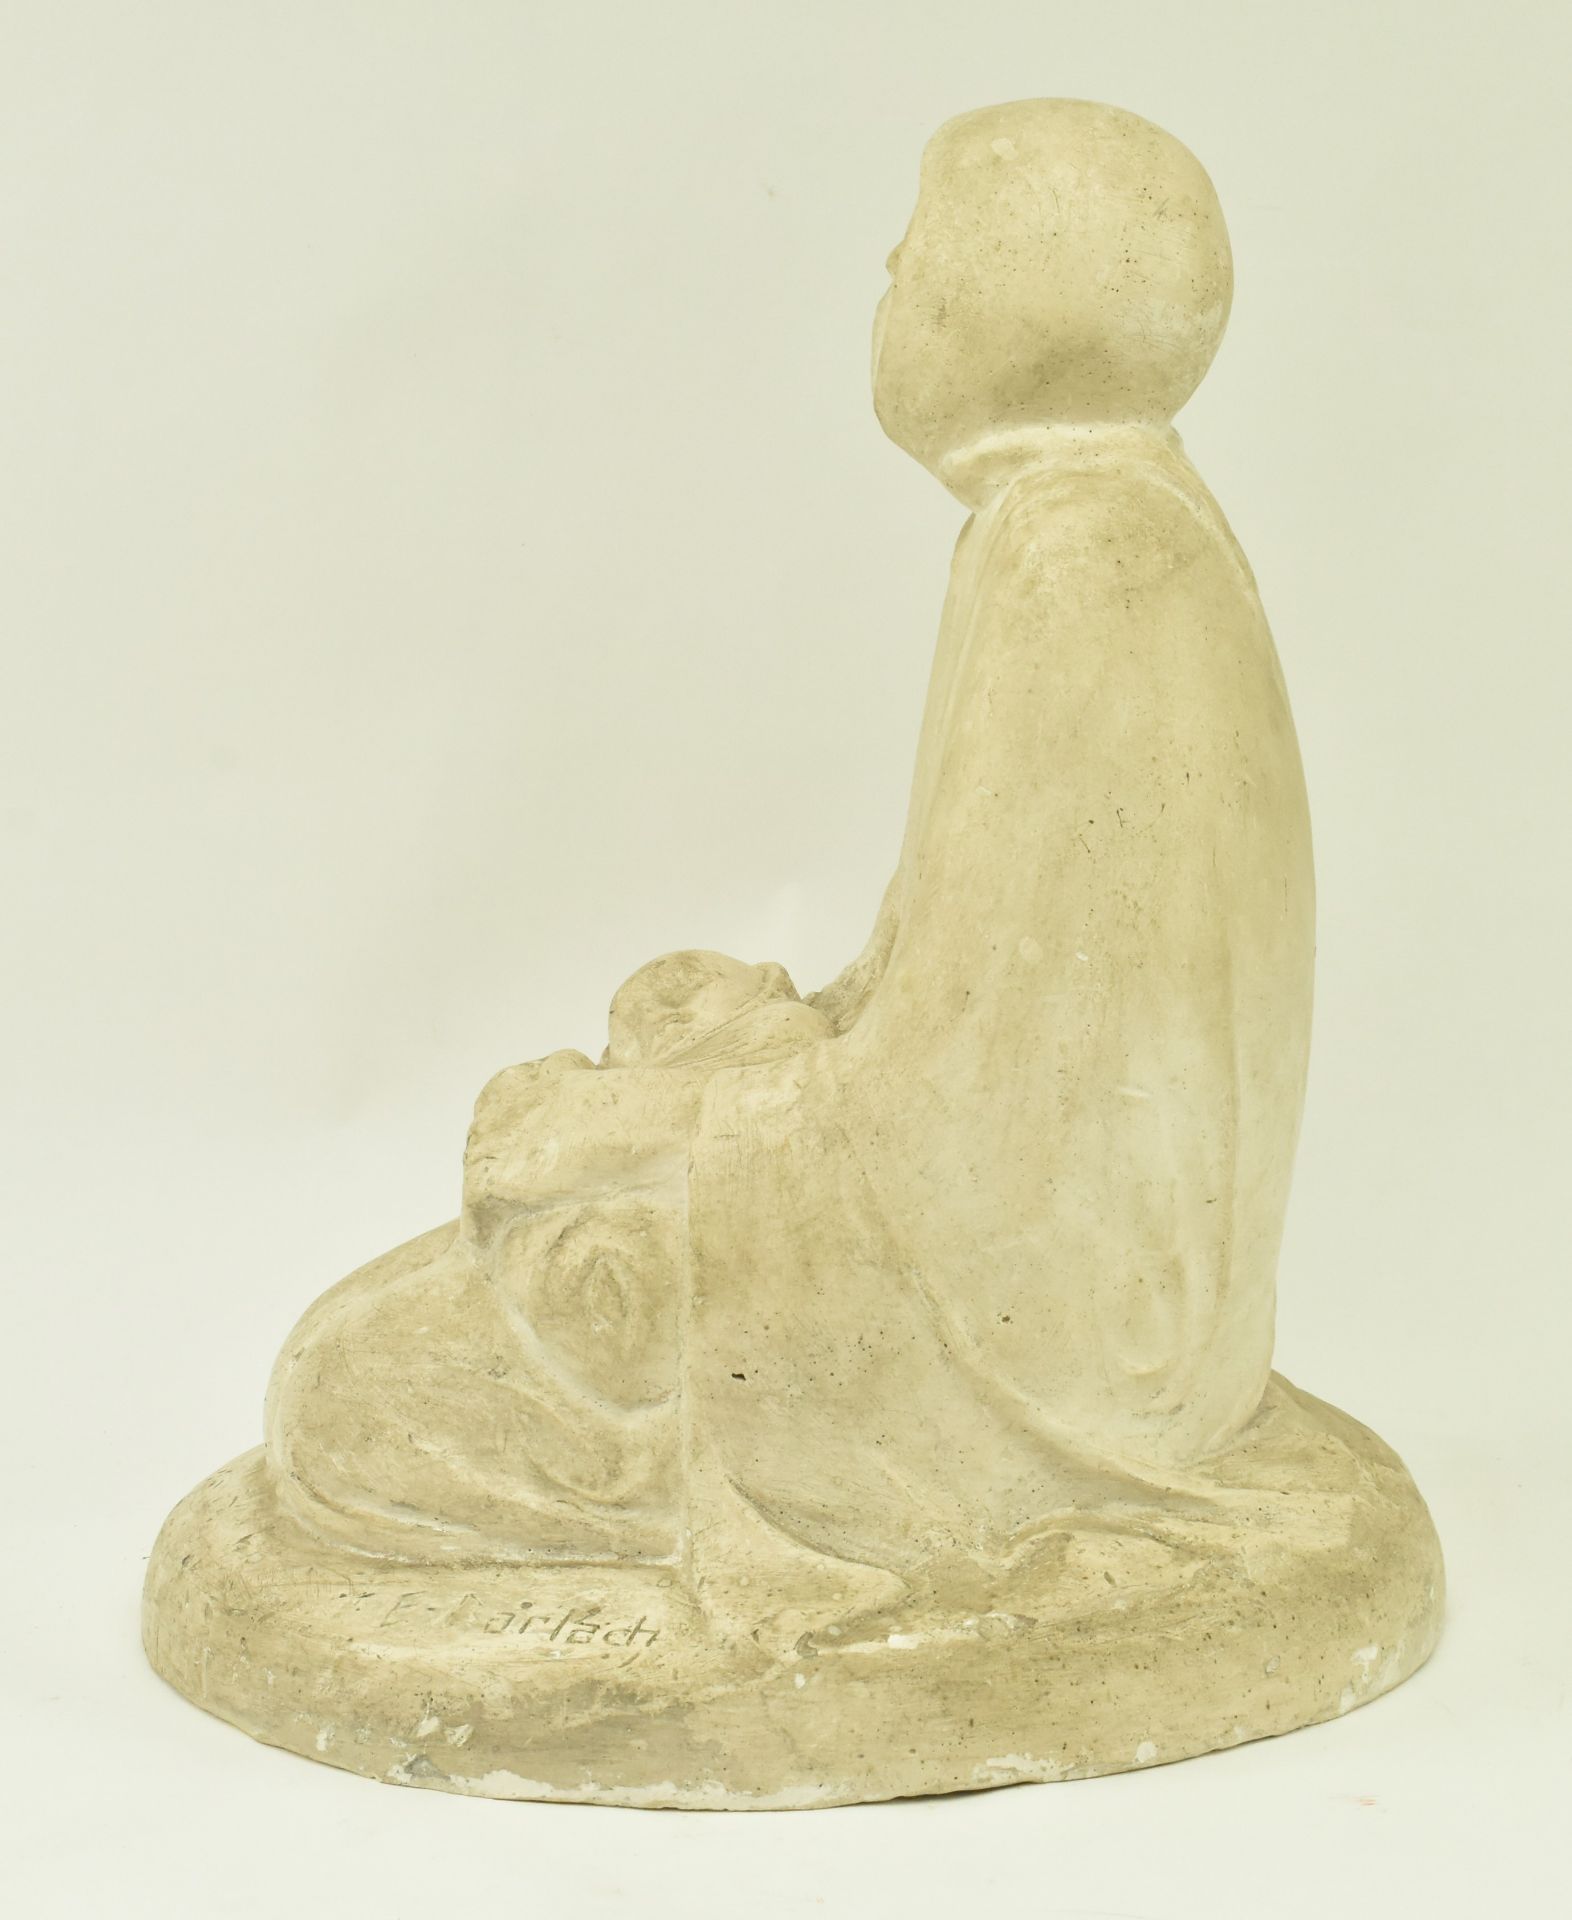 ATTRIBUTED TO ERNST BARLACH - WOMAN WITH CHILD PLASTER FIGURE - Image 3 of 7